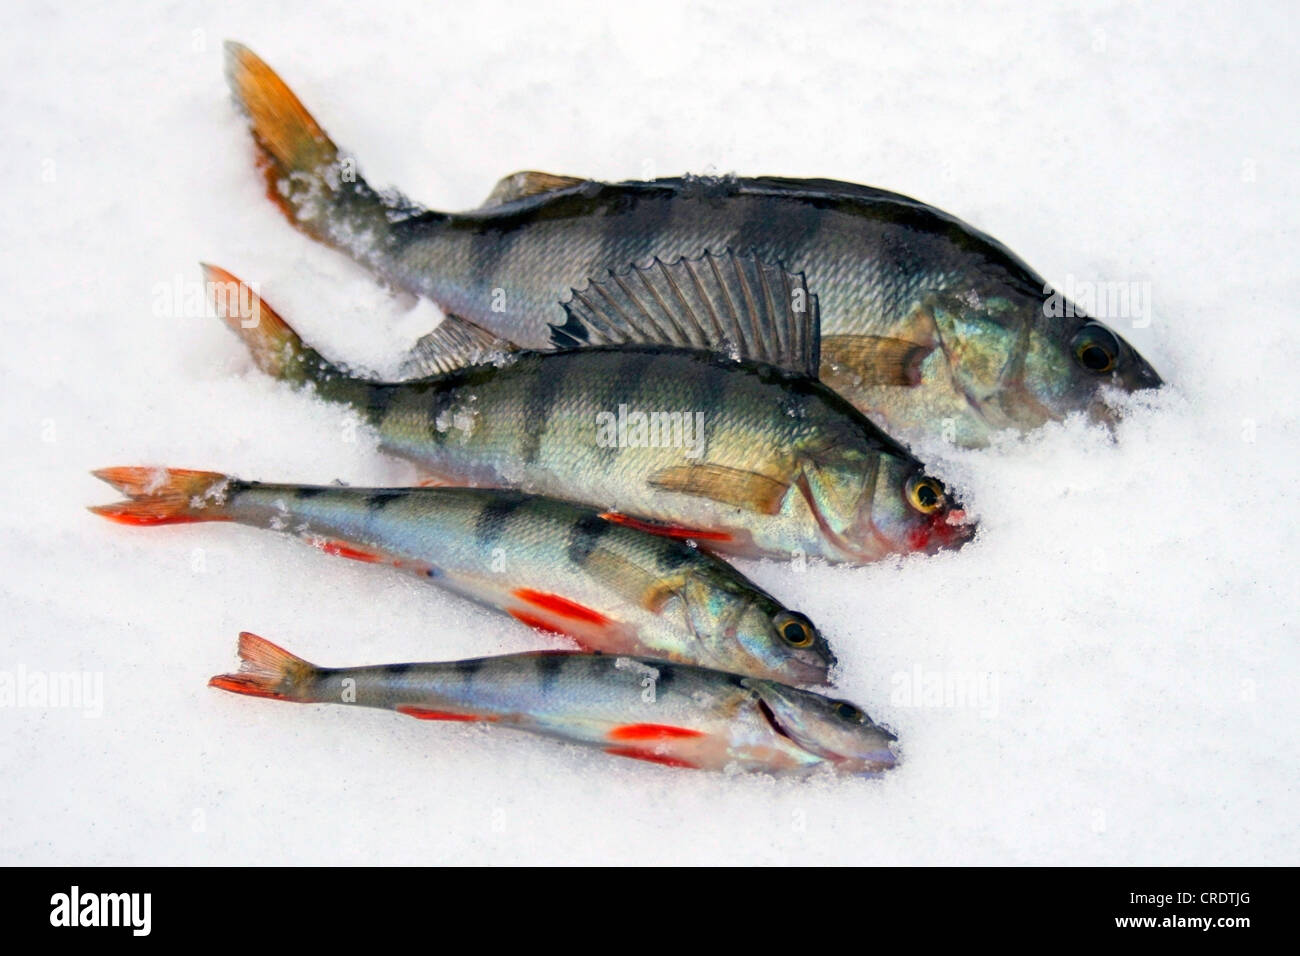 How to Ice Fish for White Perch